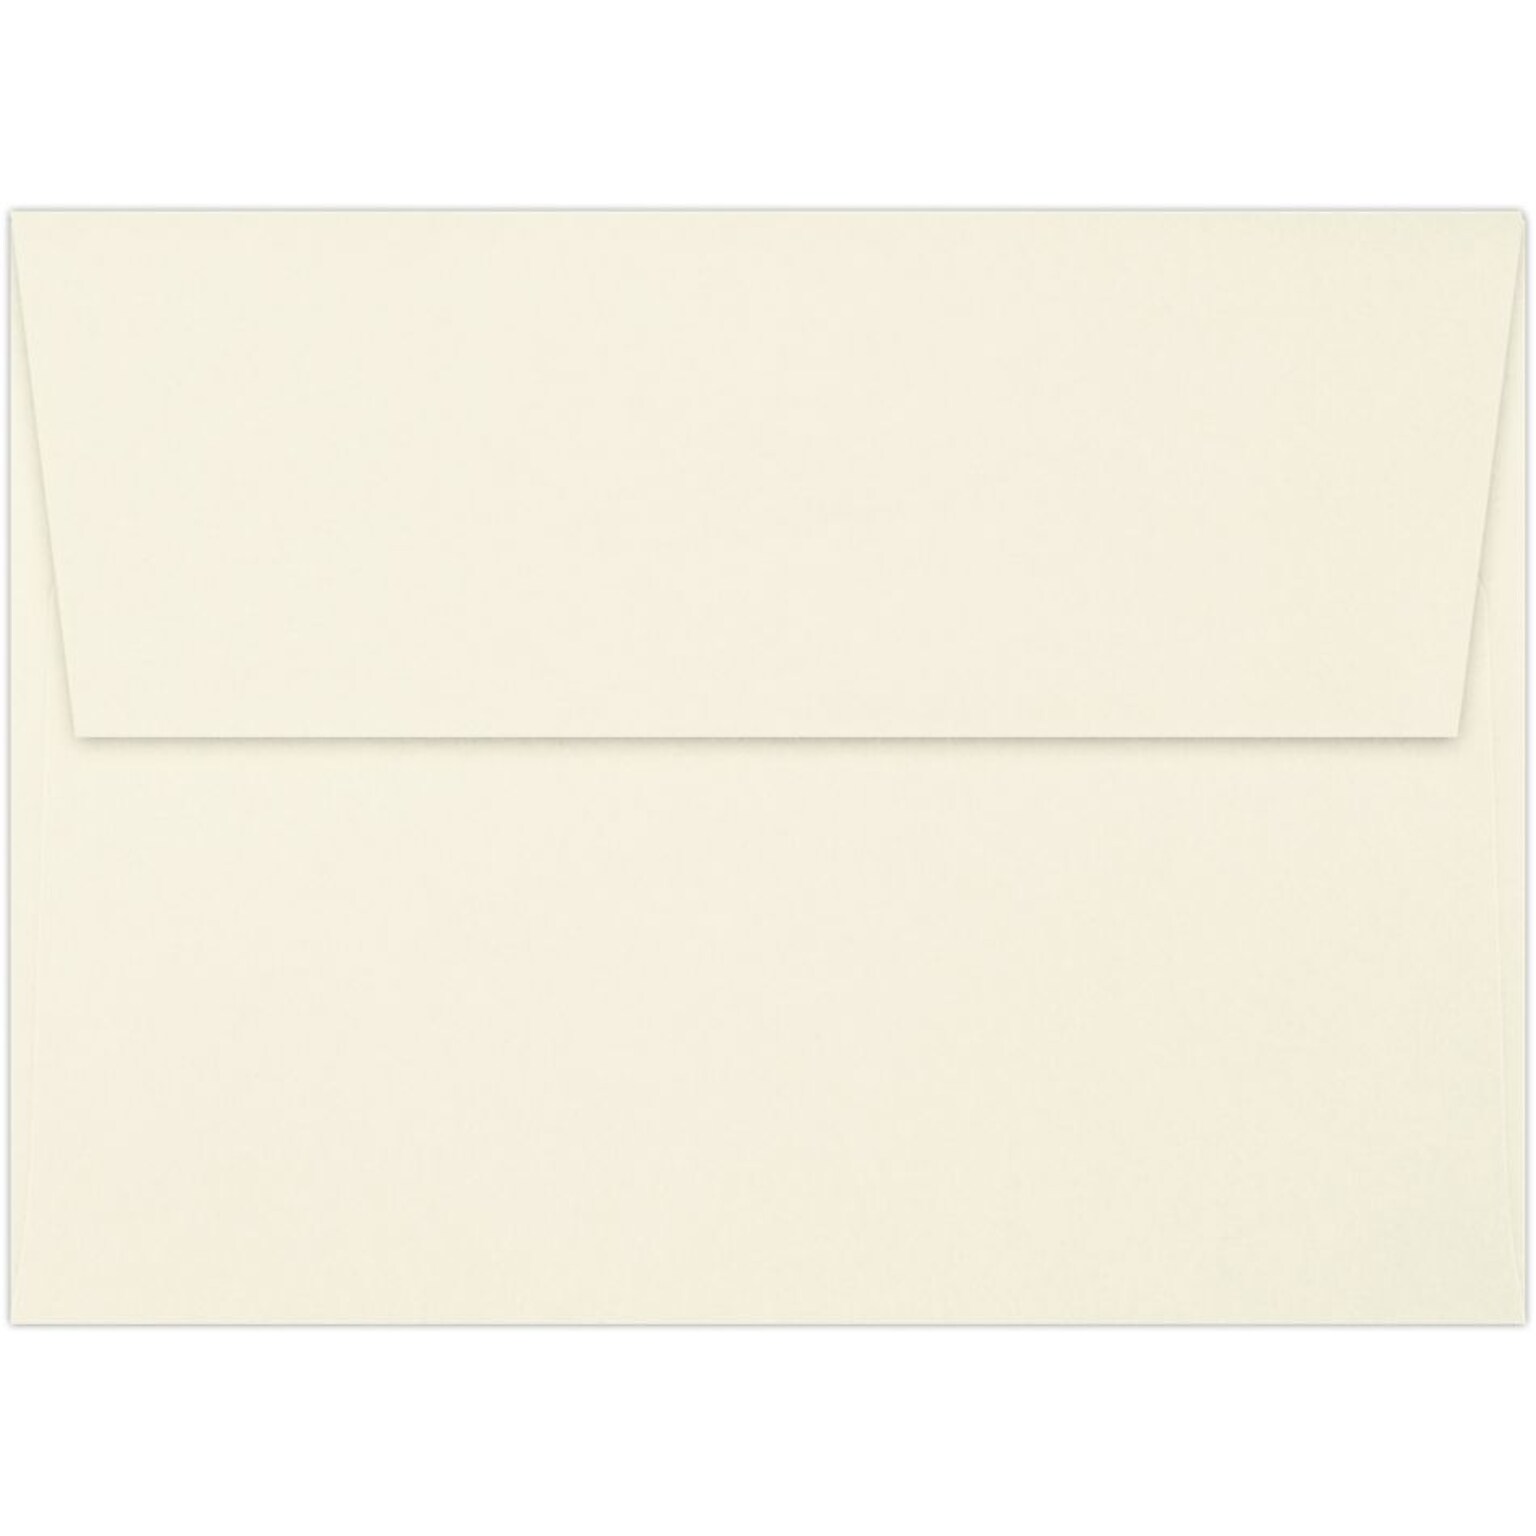 LUX A7 Invitation Envelopes (5 1/4 x 7 1/4) 50/Pack, 70lb. Classic Crest® Natural White (4880-70NW-50)